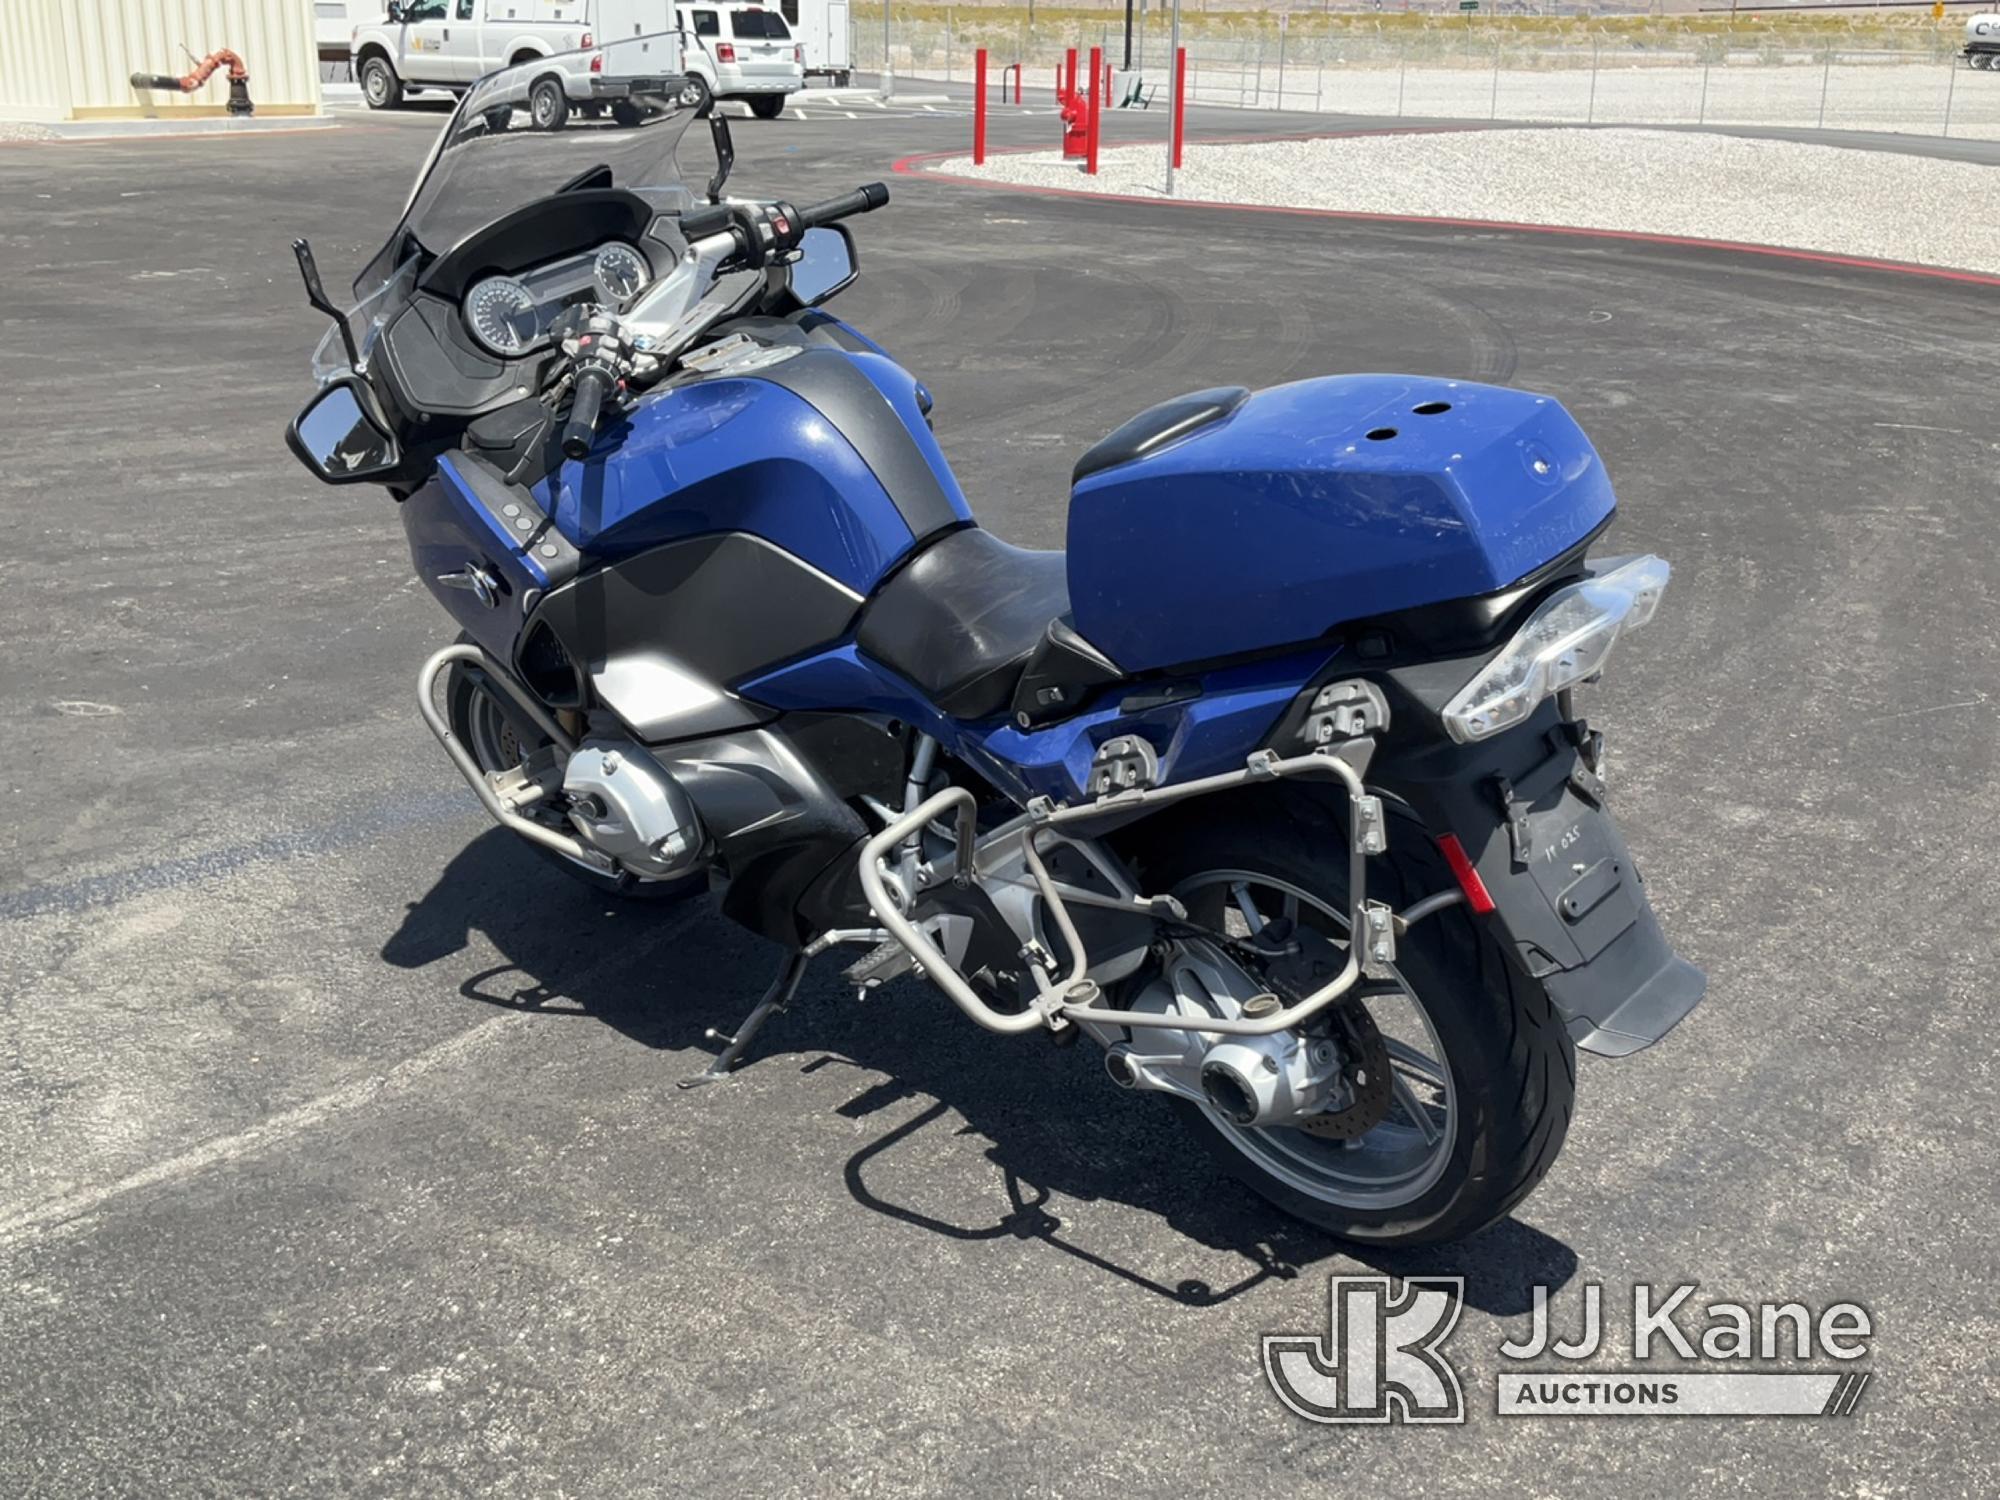 (Las Vegas, NV) 2018 BMW R1200RT Towed In, No Battery Turns Over, Will Not Start, Engine Problems